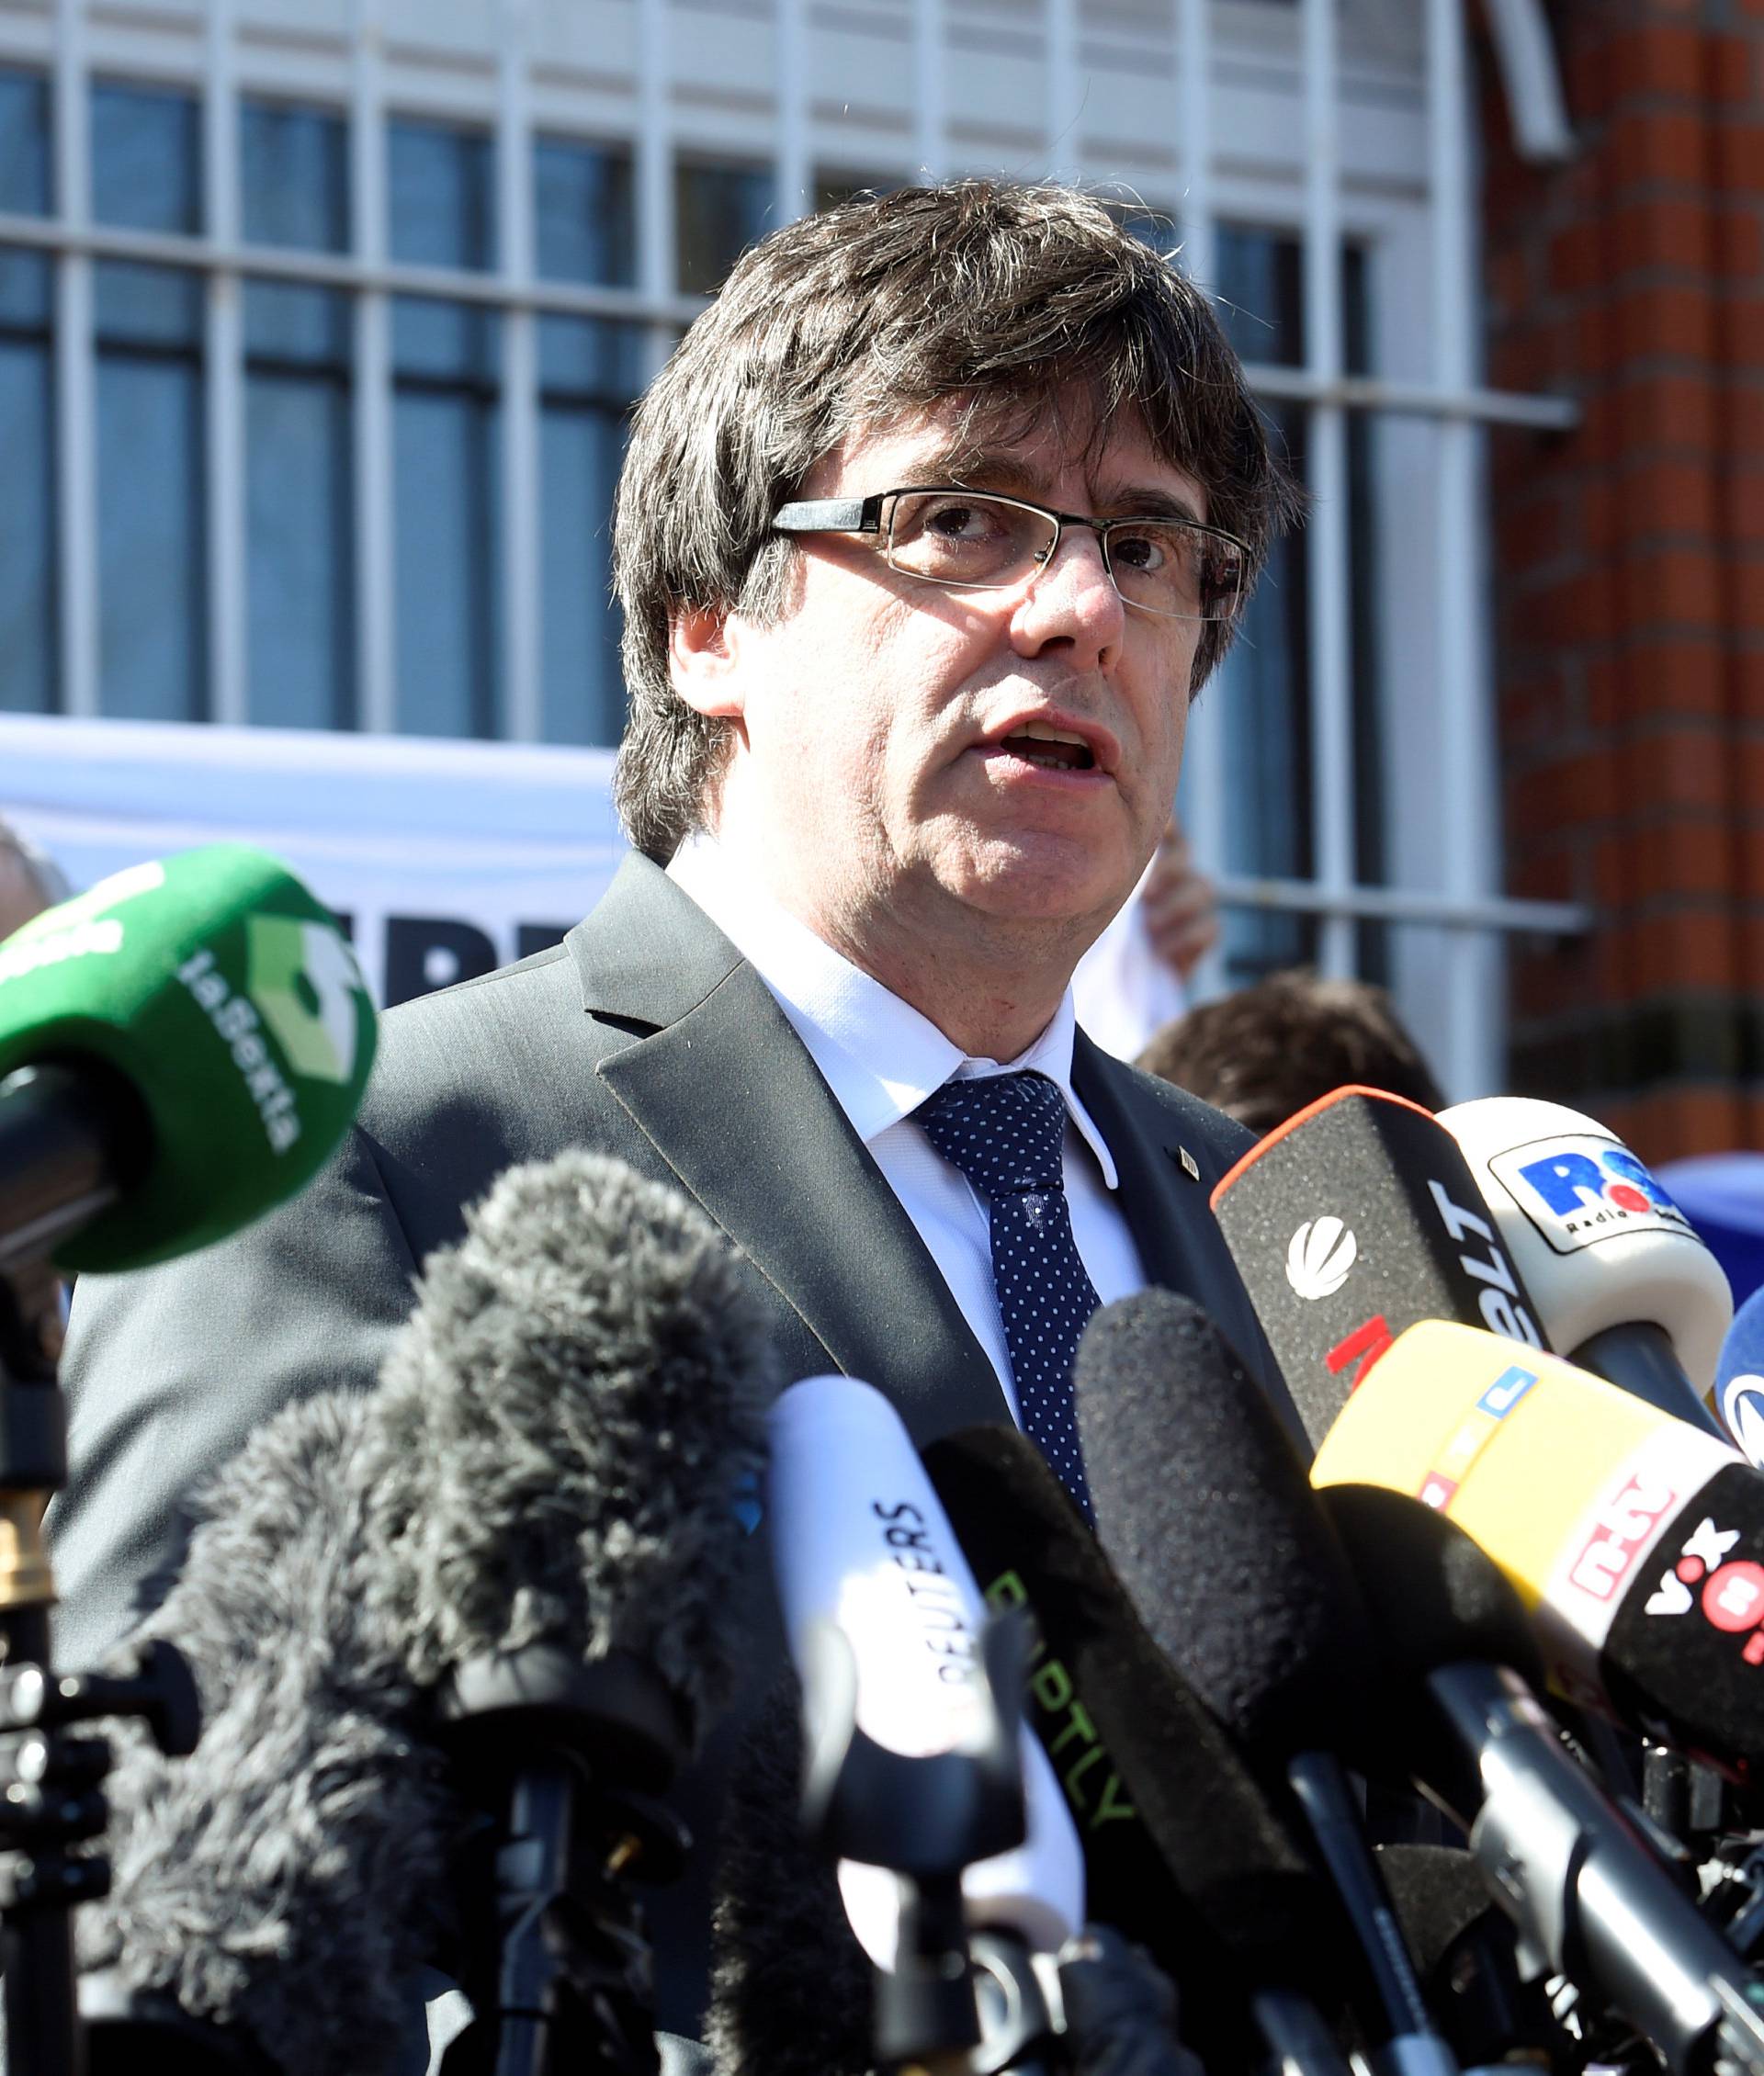 Catalonia's former leader Carles Puigdemont talks to the media as he leaves the prison in Neumuenster